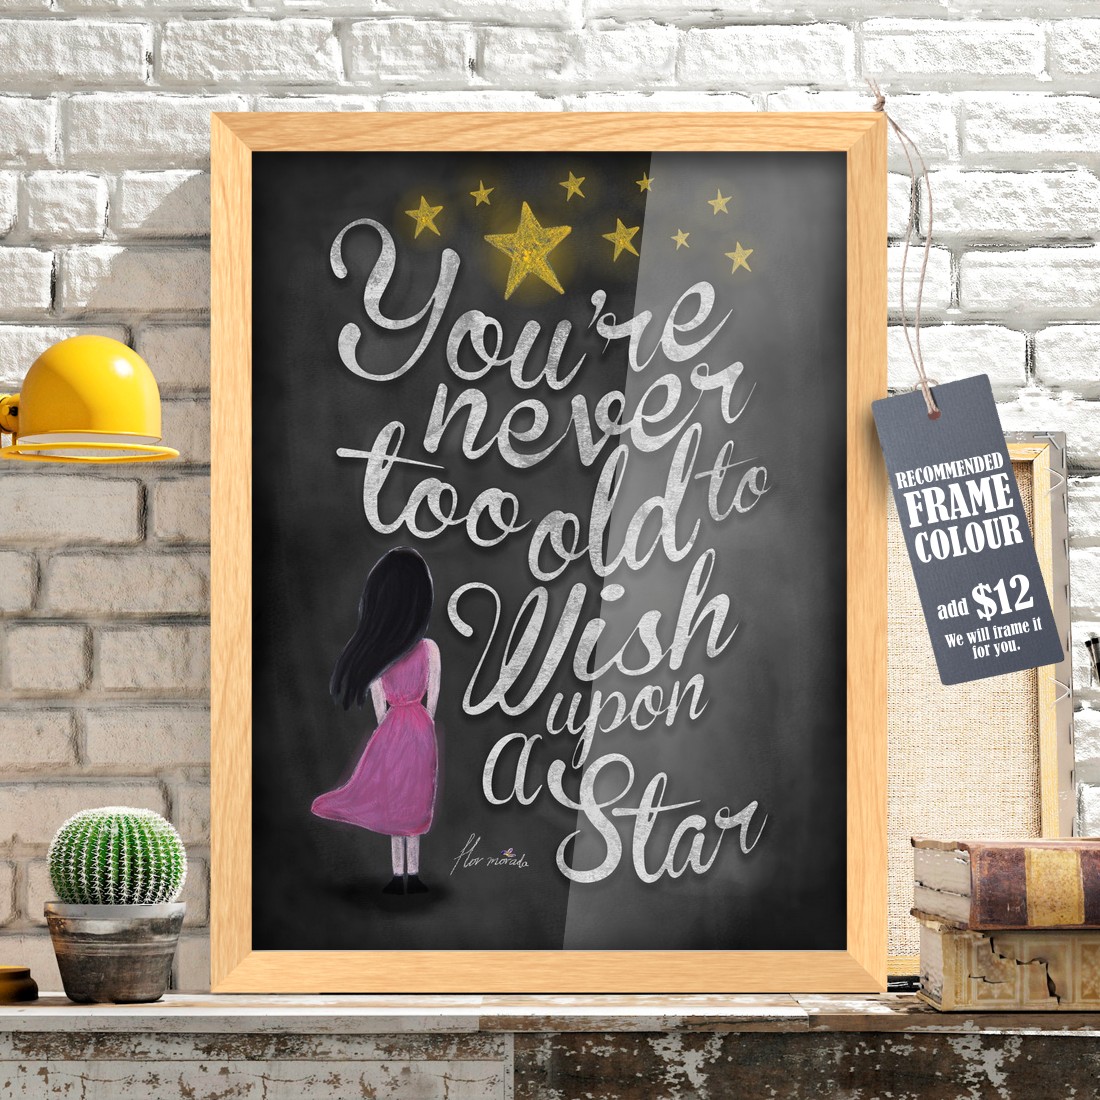 Wished upon a star chalkboard wall sign